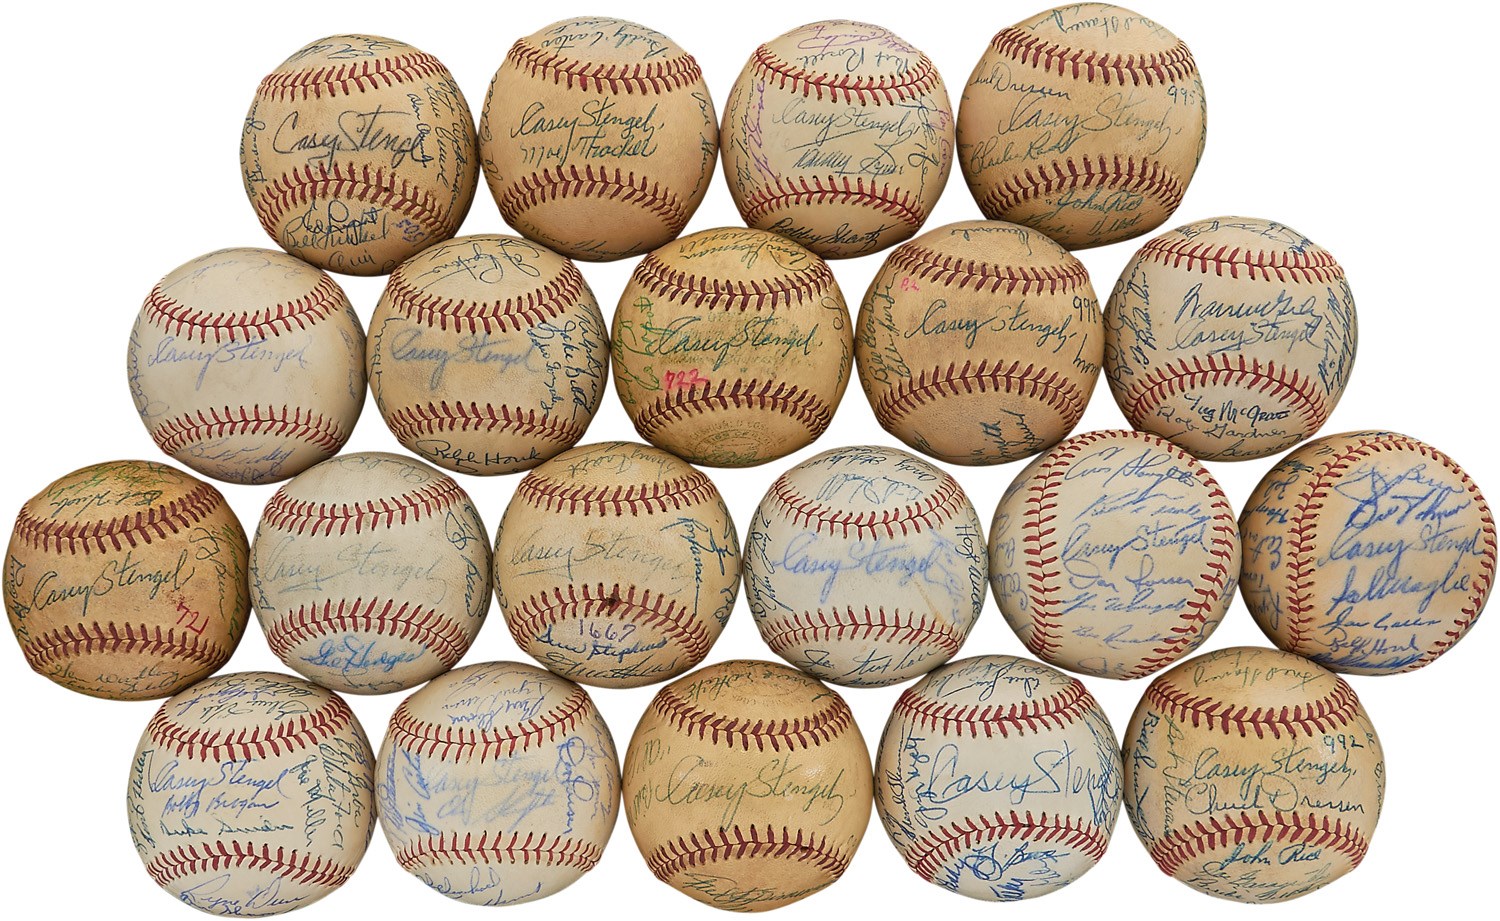 The John O'connor Signed Baseball Collection - 1940s-50s Yankees, HOF and All-Star Signed Baseballs ALL w/Casey Stengel (44)